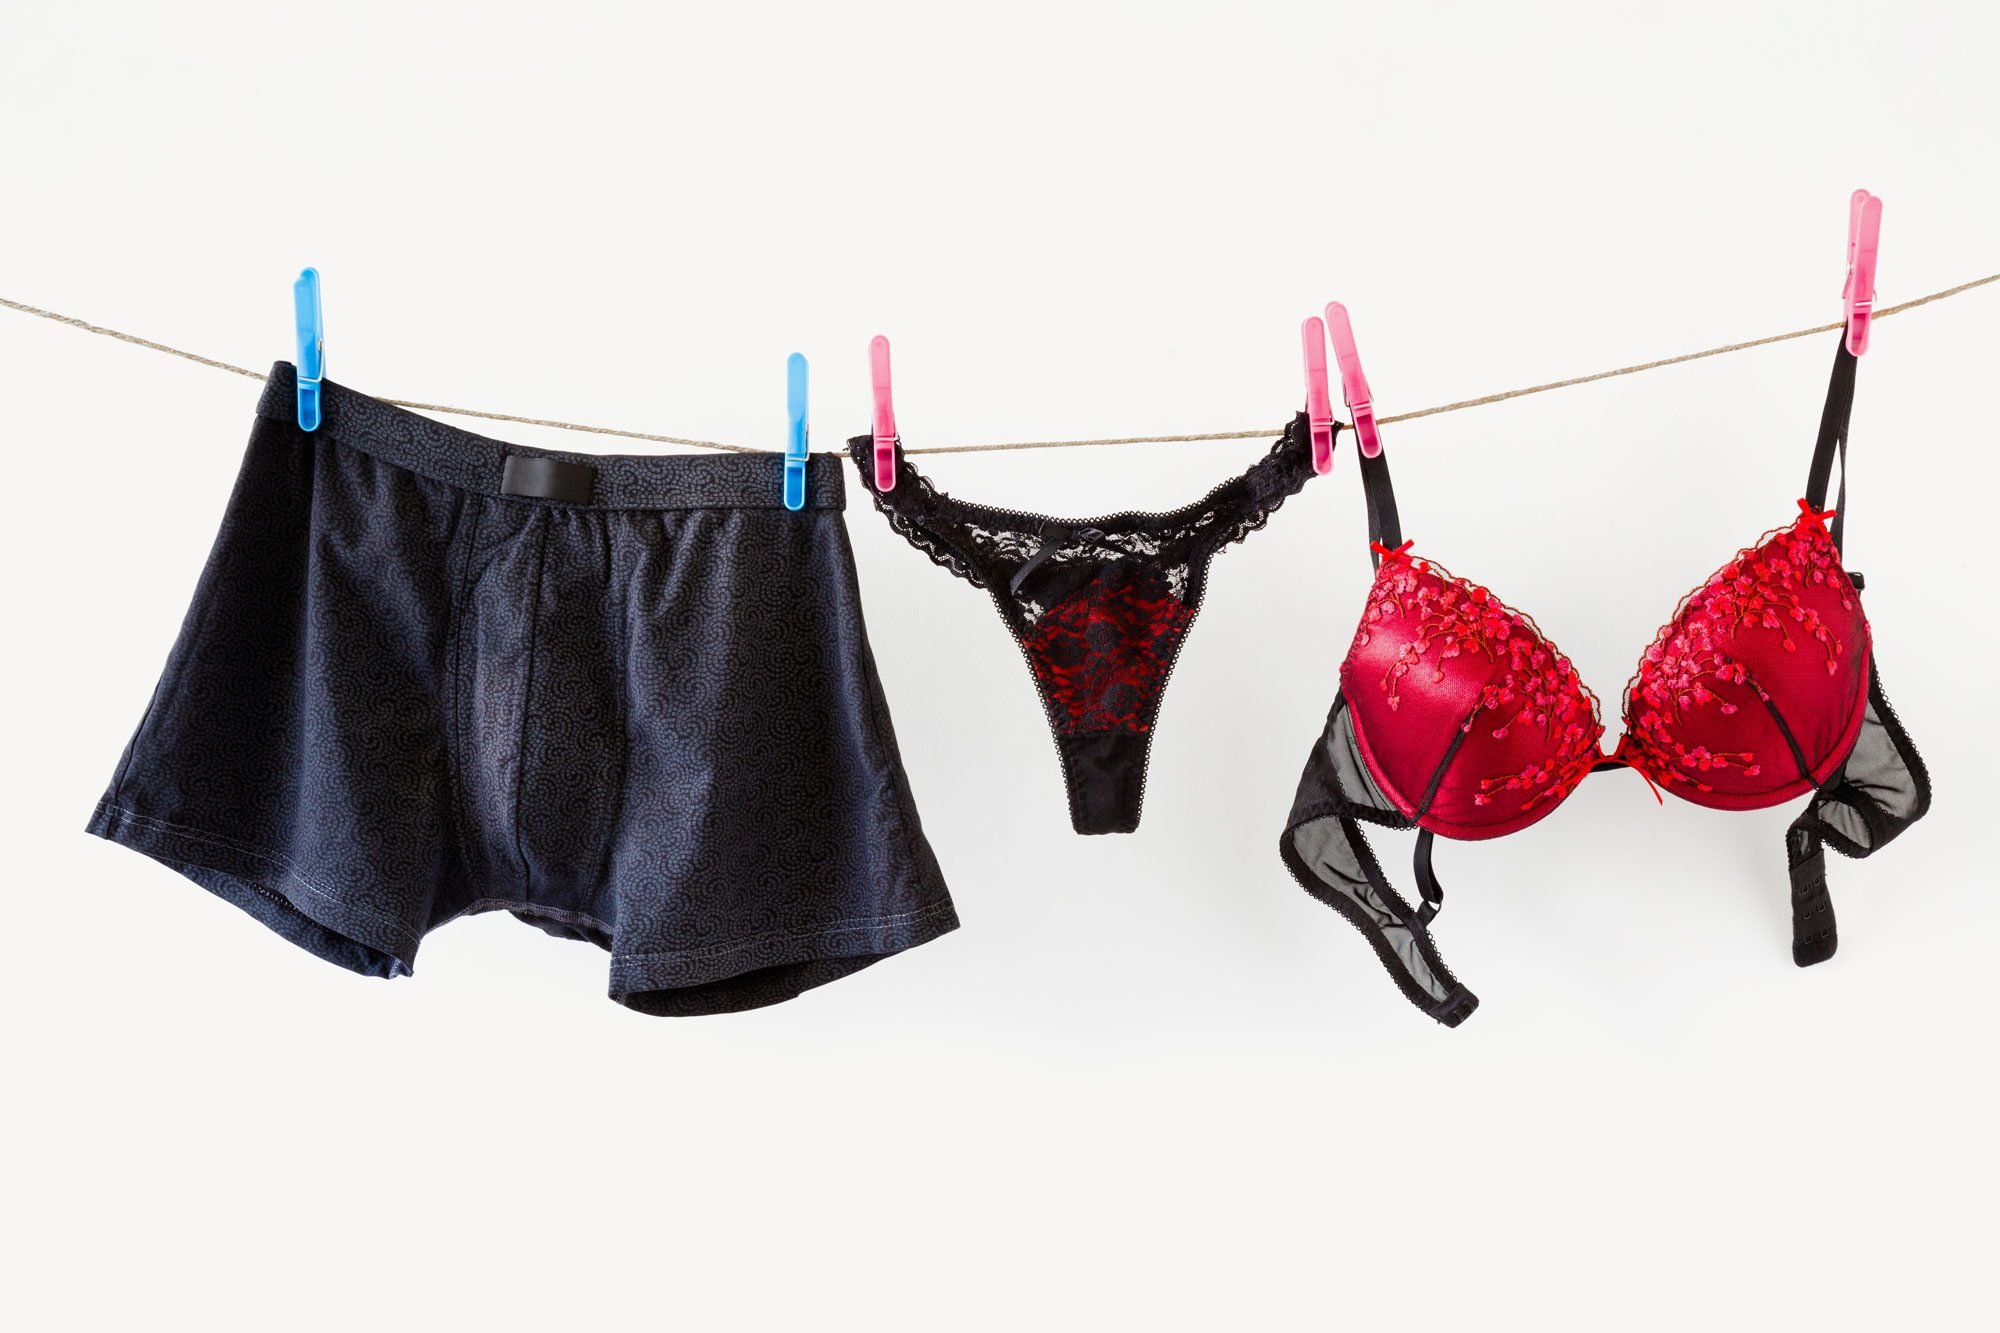 Underwear care: How to wash your panties, bras, singlets and boxers  appropriately